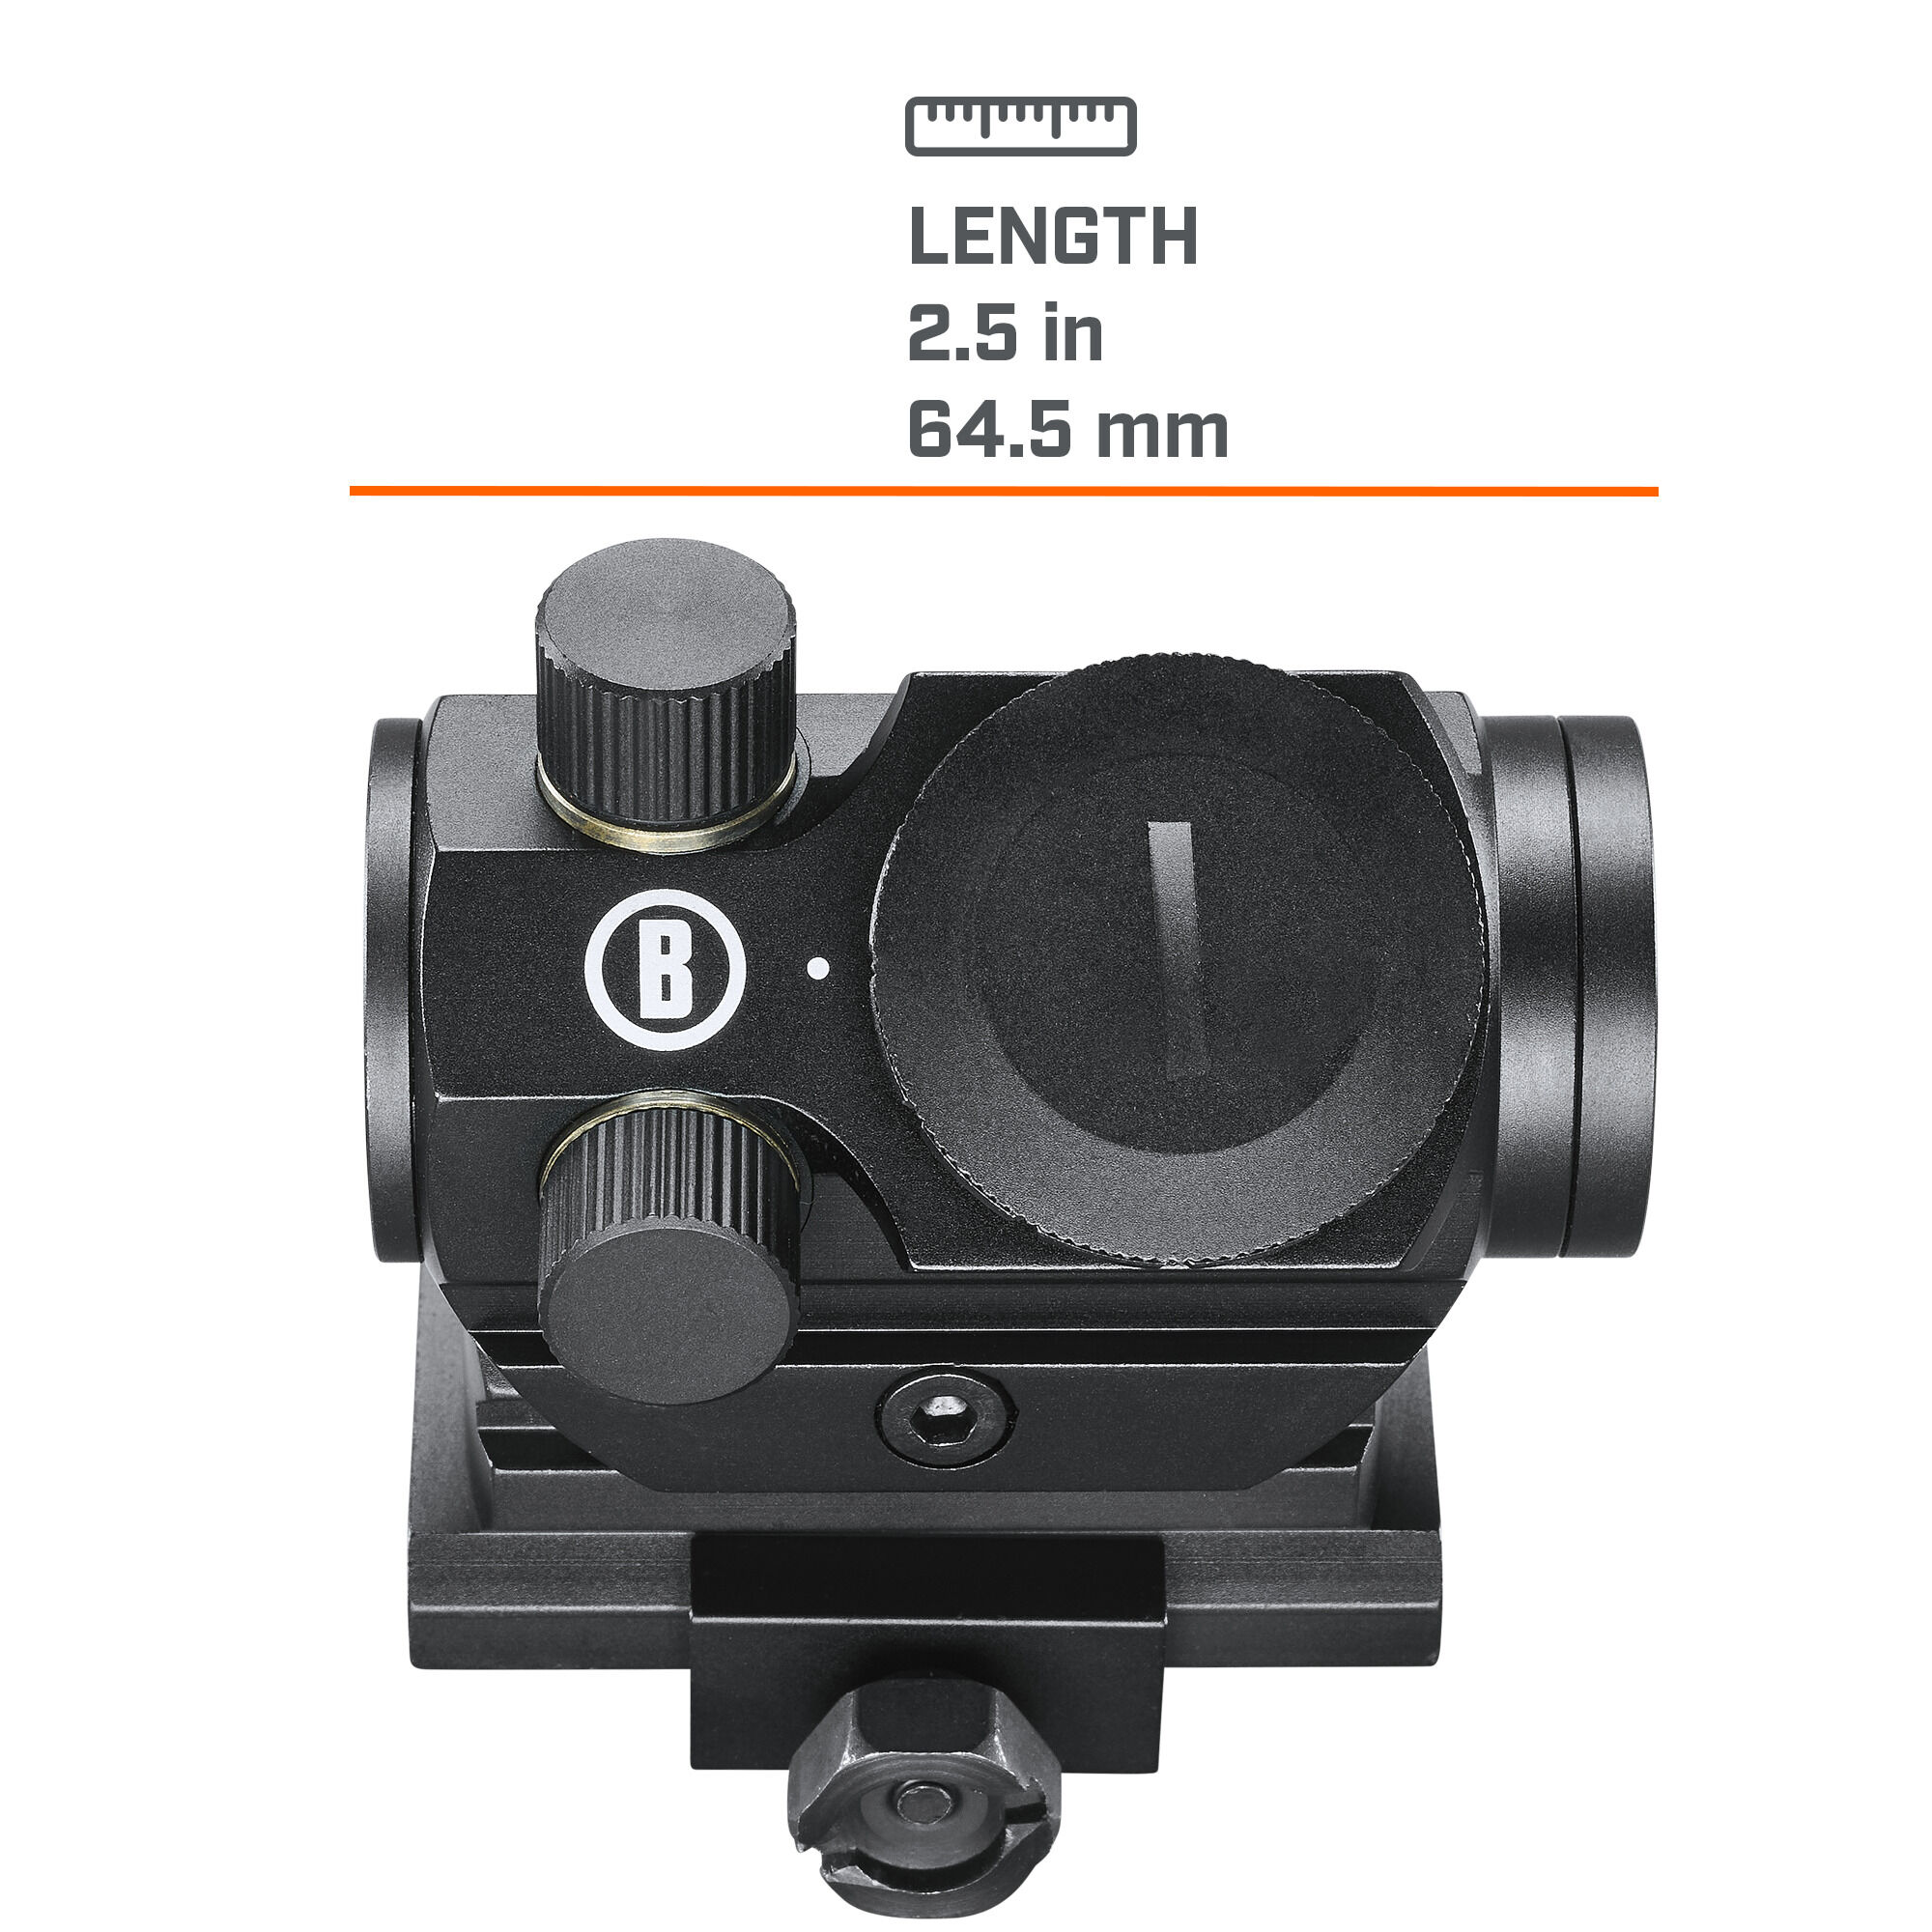 Buy AR Optics TRS-25 HIRise Red Dot Sight and More | Bushnell